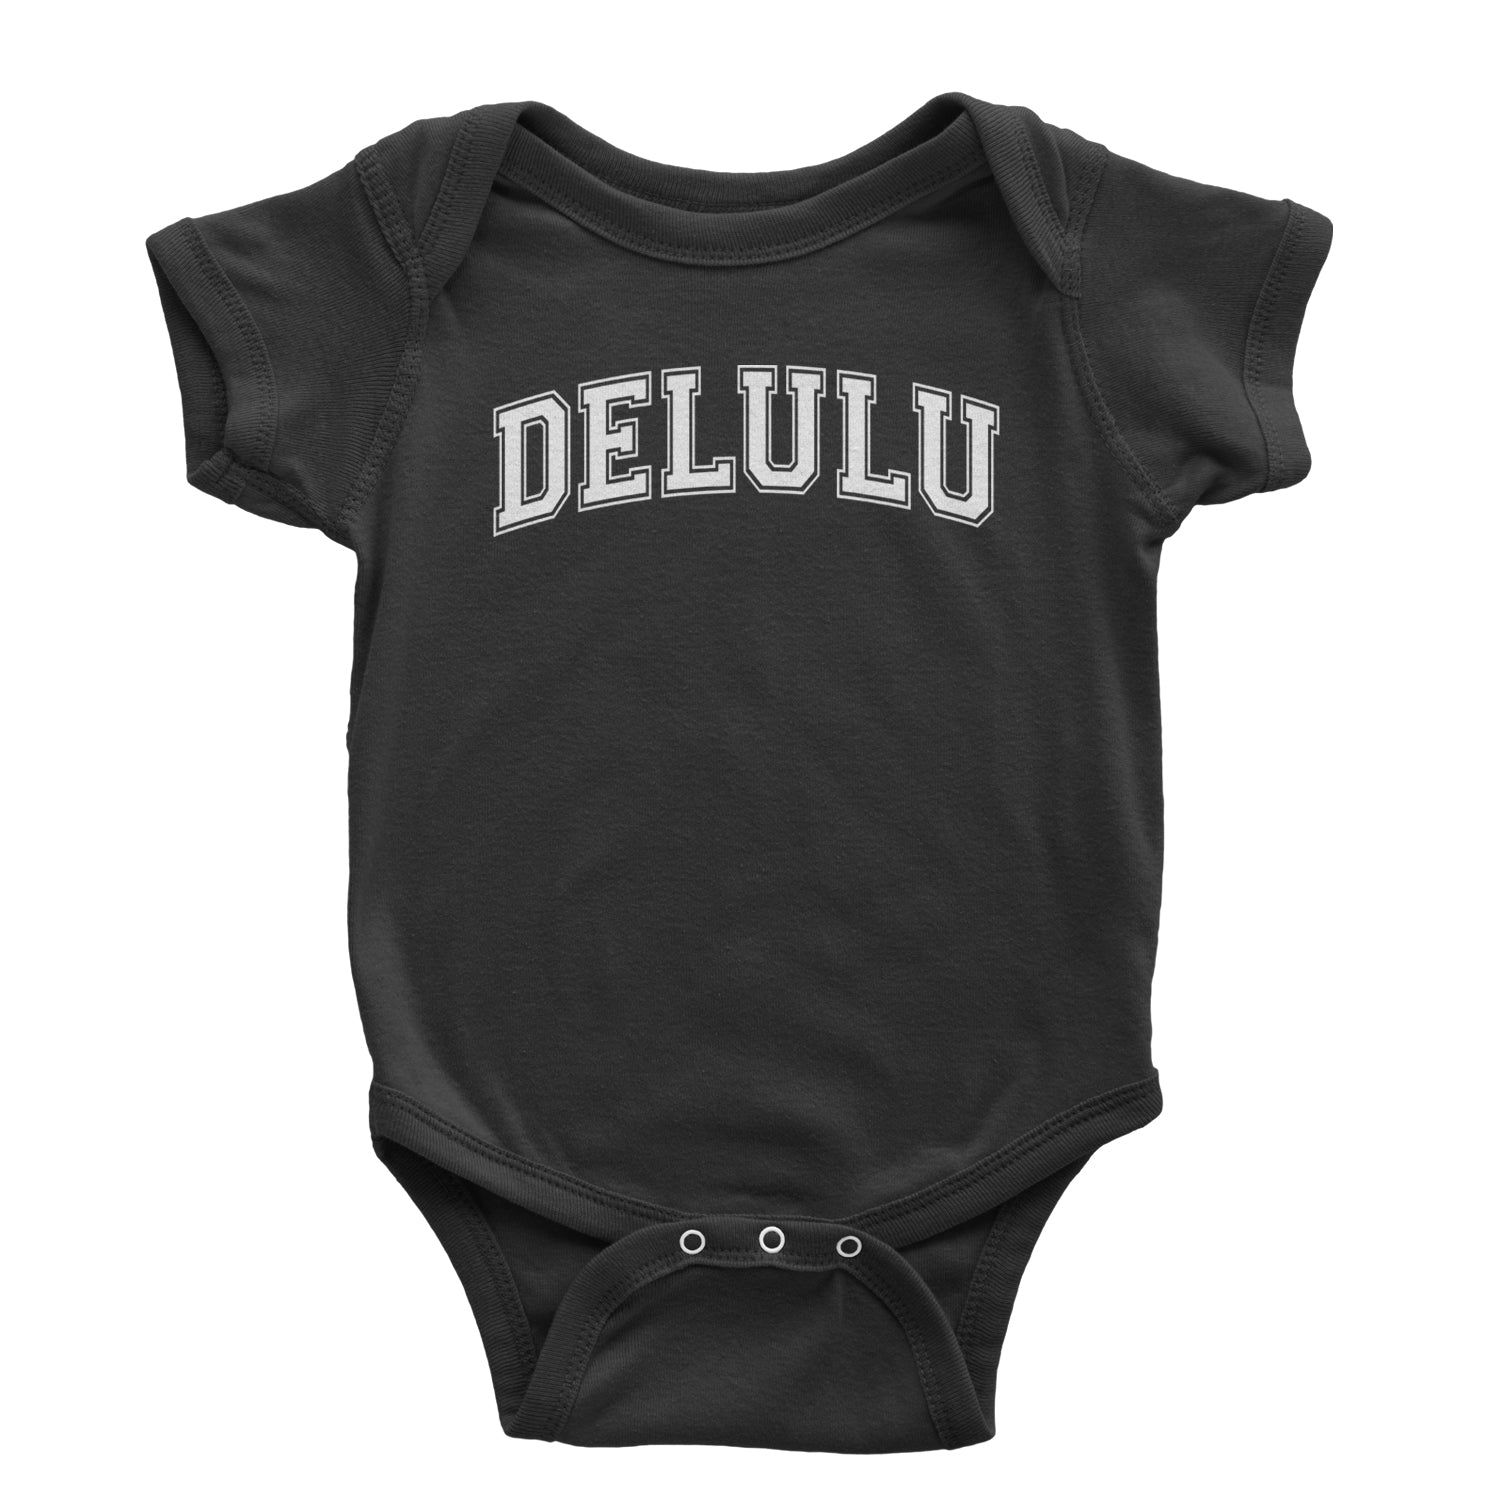 Delulu Delusional Light Hearted Infant One-Piece Romper Bodysuit and Toddler T-shirt